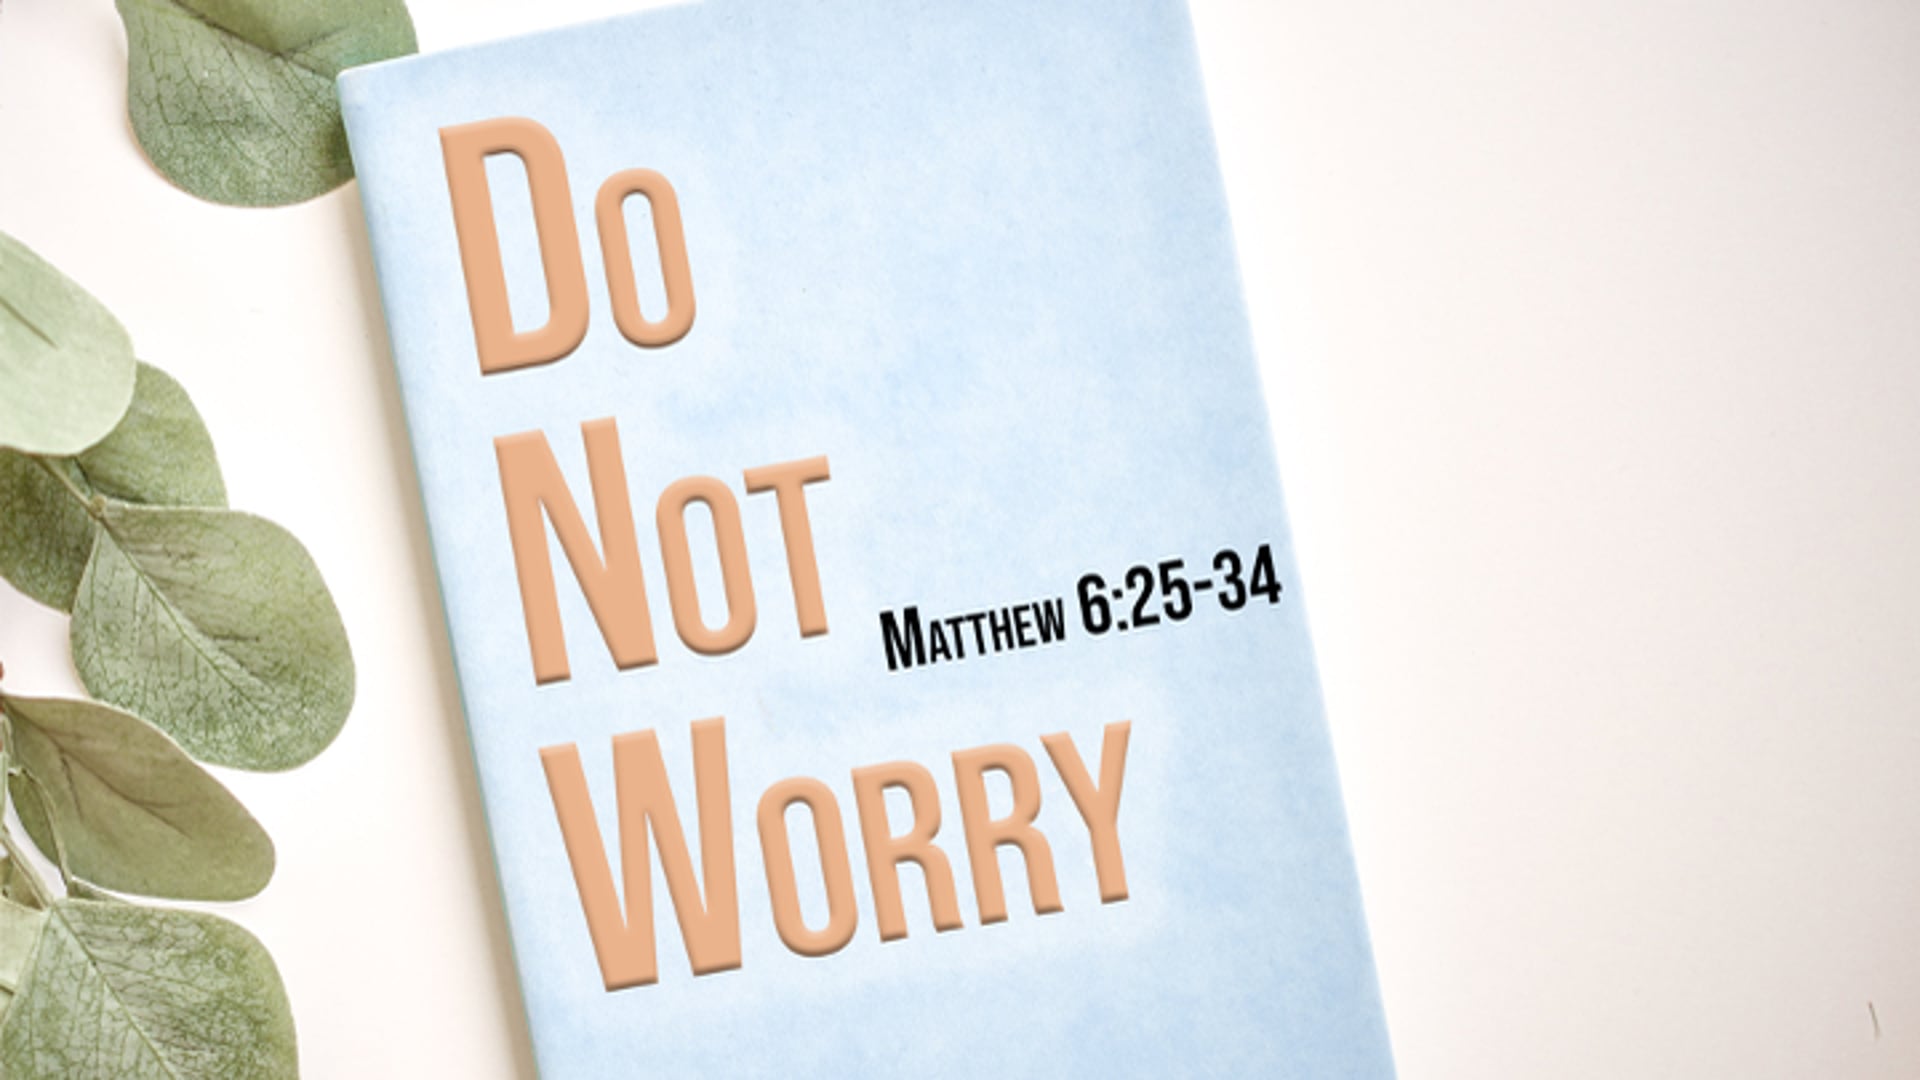 Do Not Worry